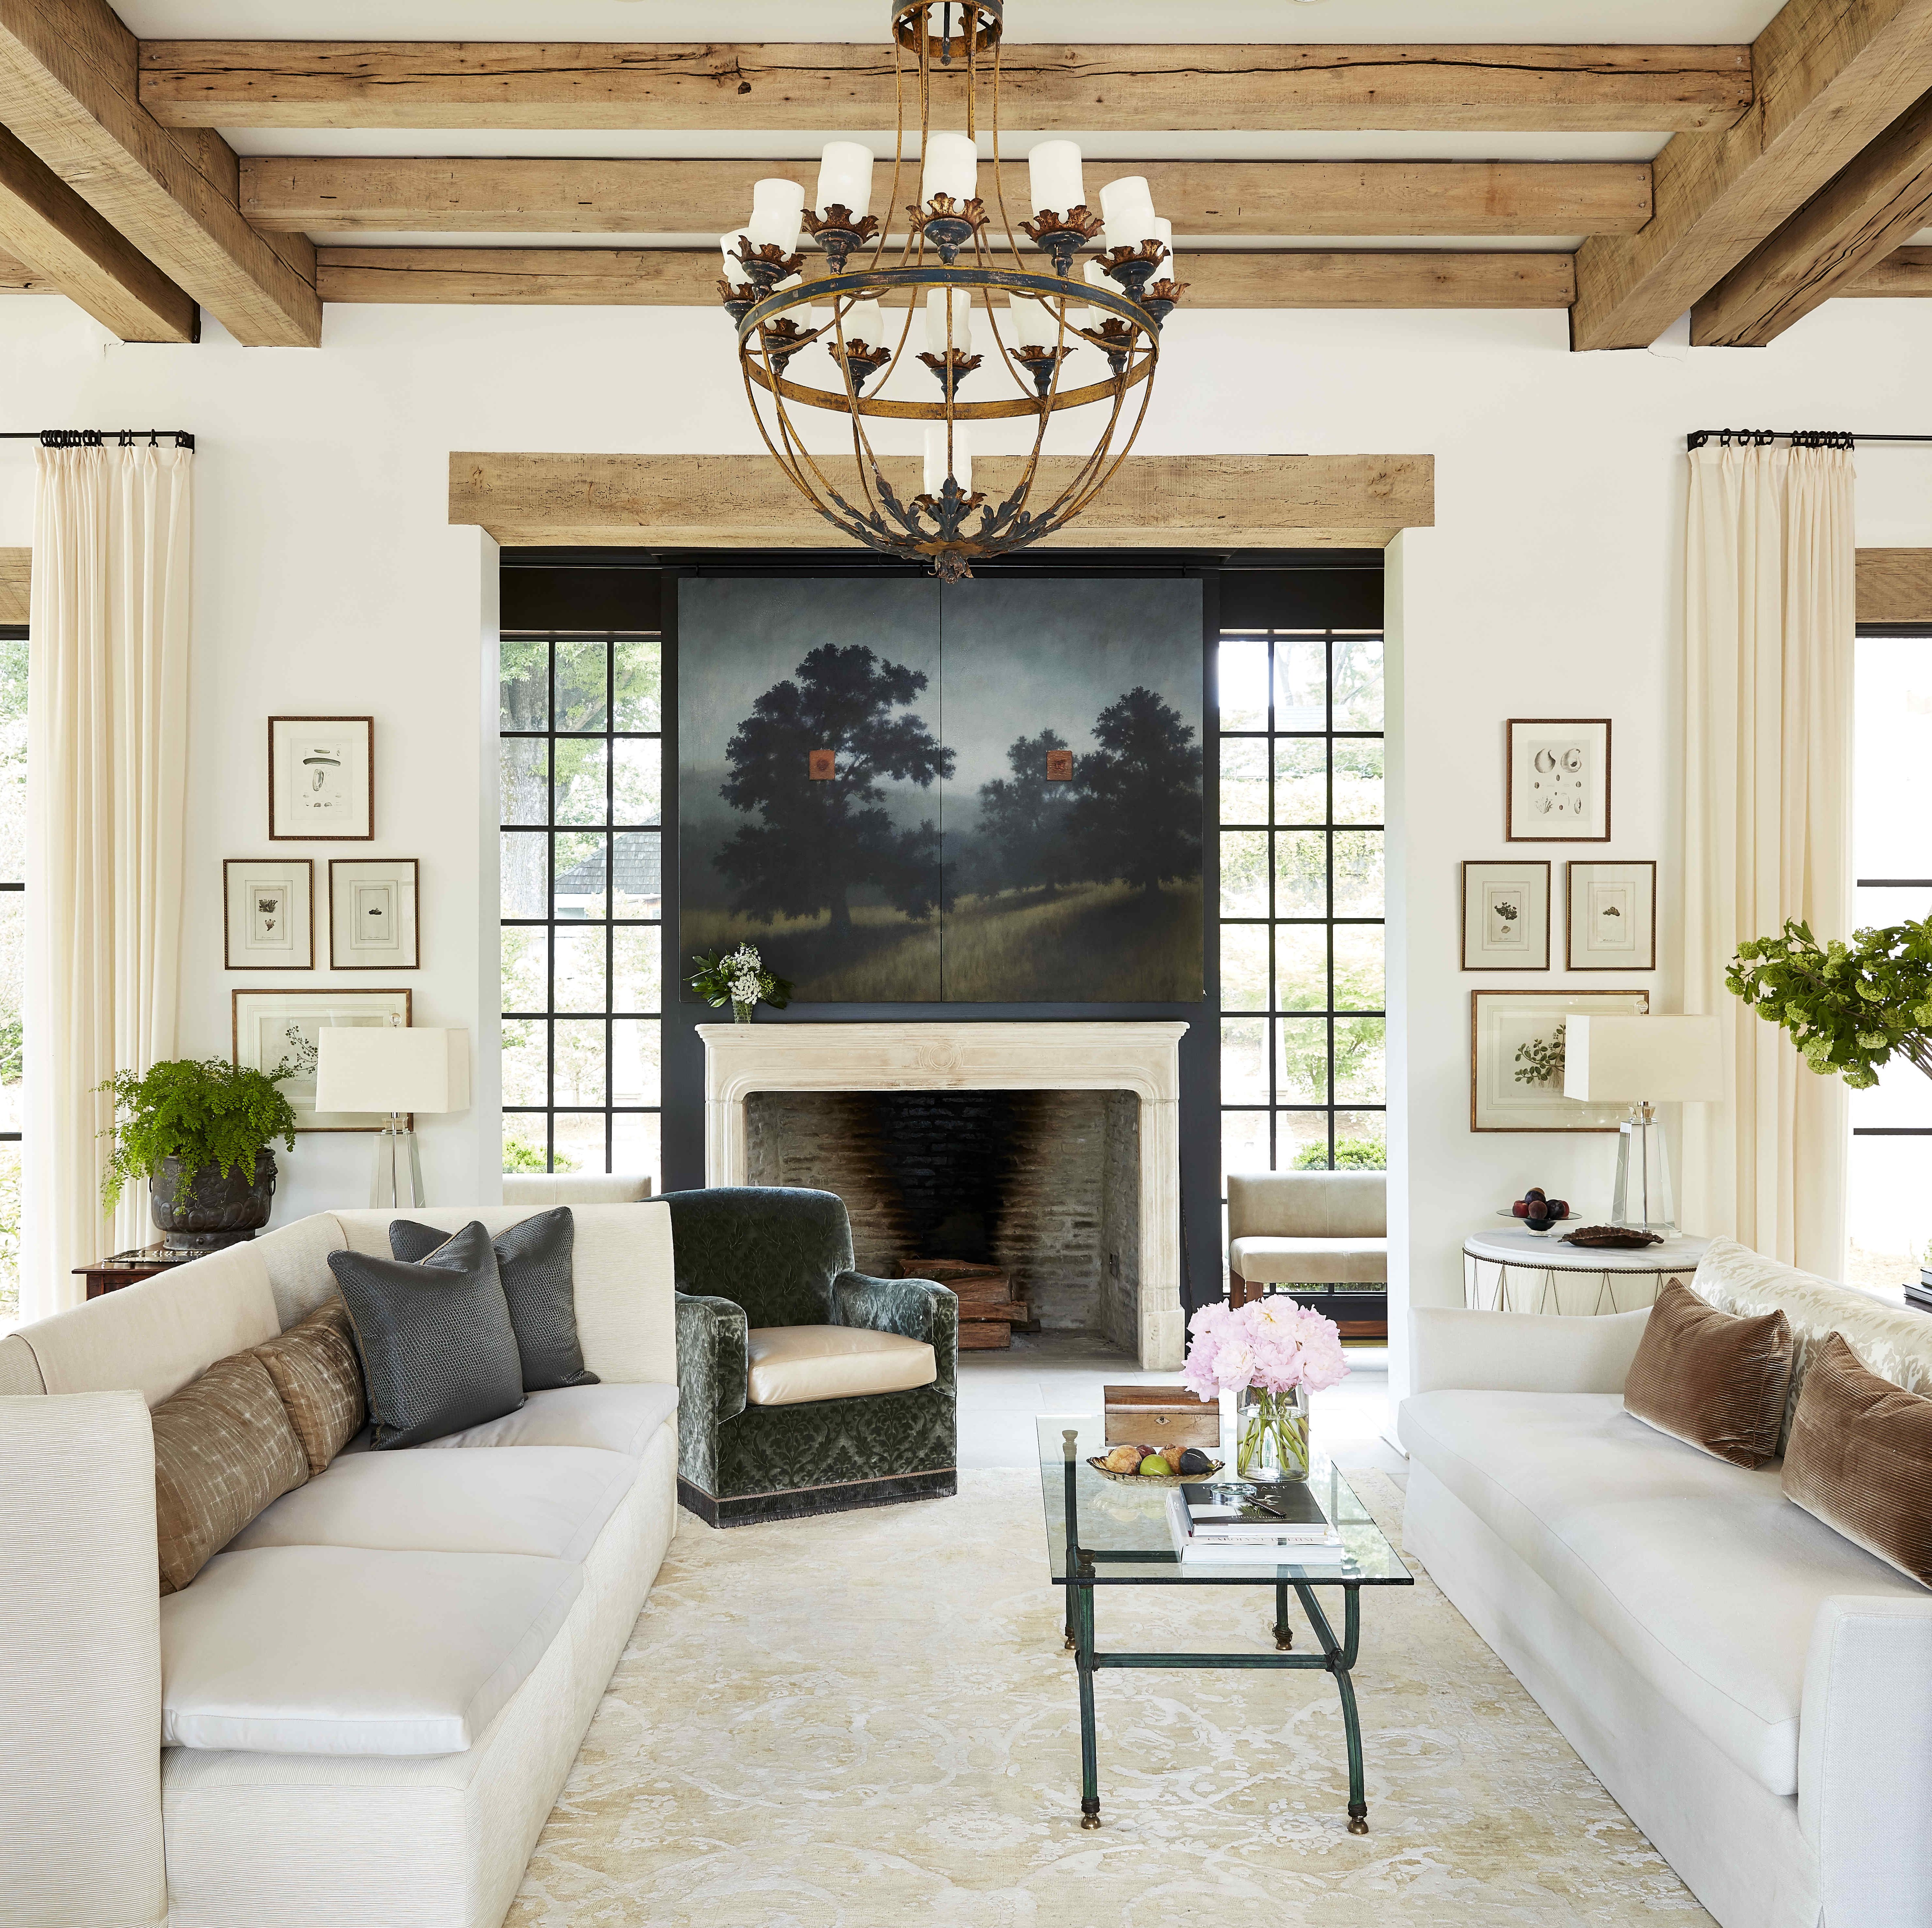 stylish antique rustic decorating ideas for living rooms